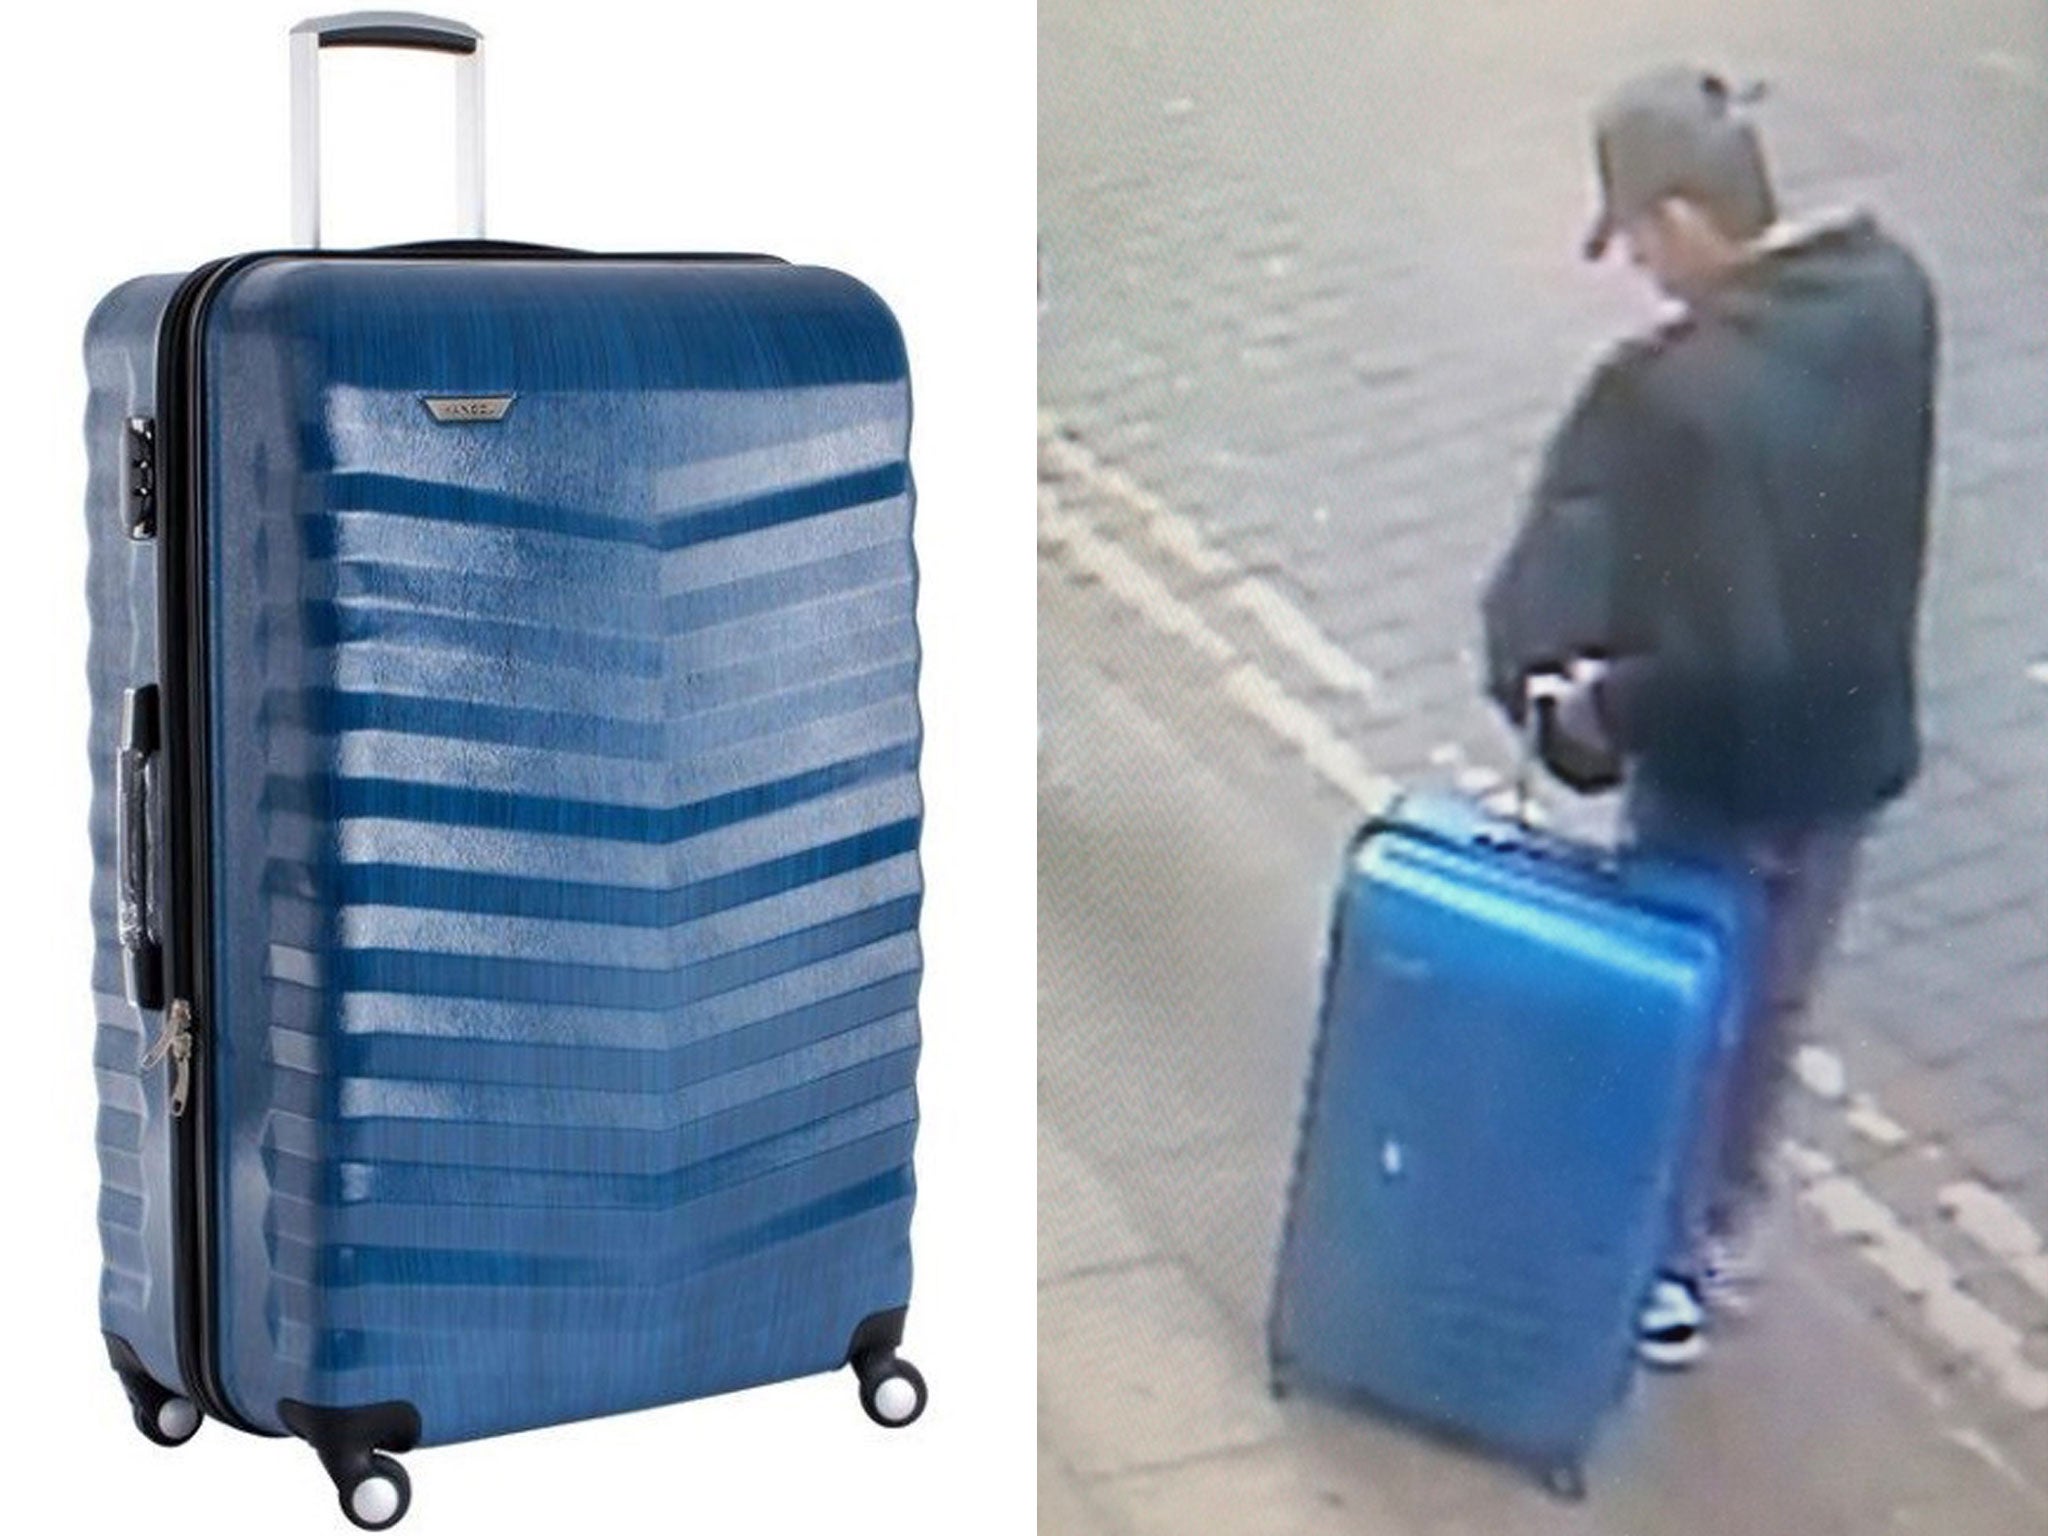 Police released an image of the bomber carrying a distinctive blue suitcase